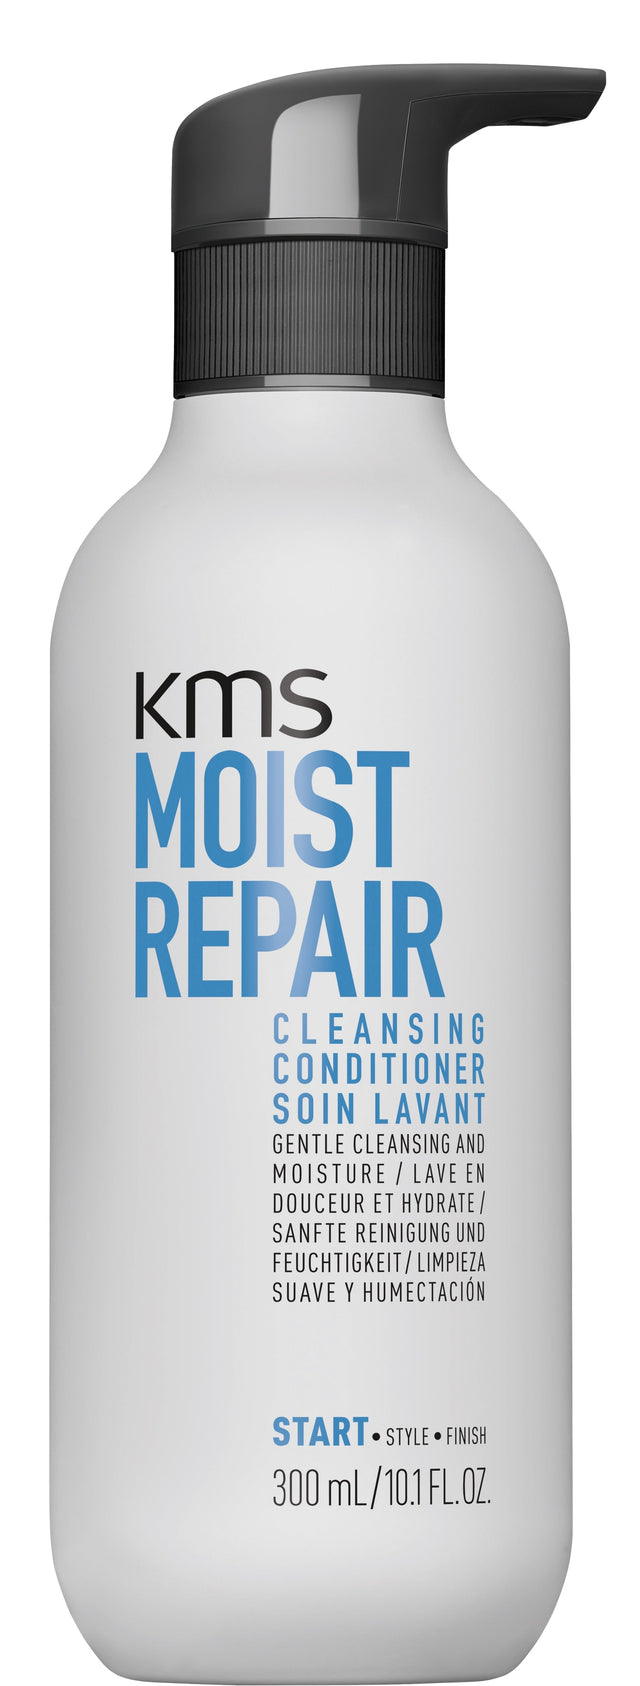 MoistRepair Cleansing Conditioner Image thumbnail